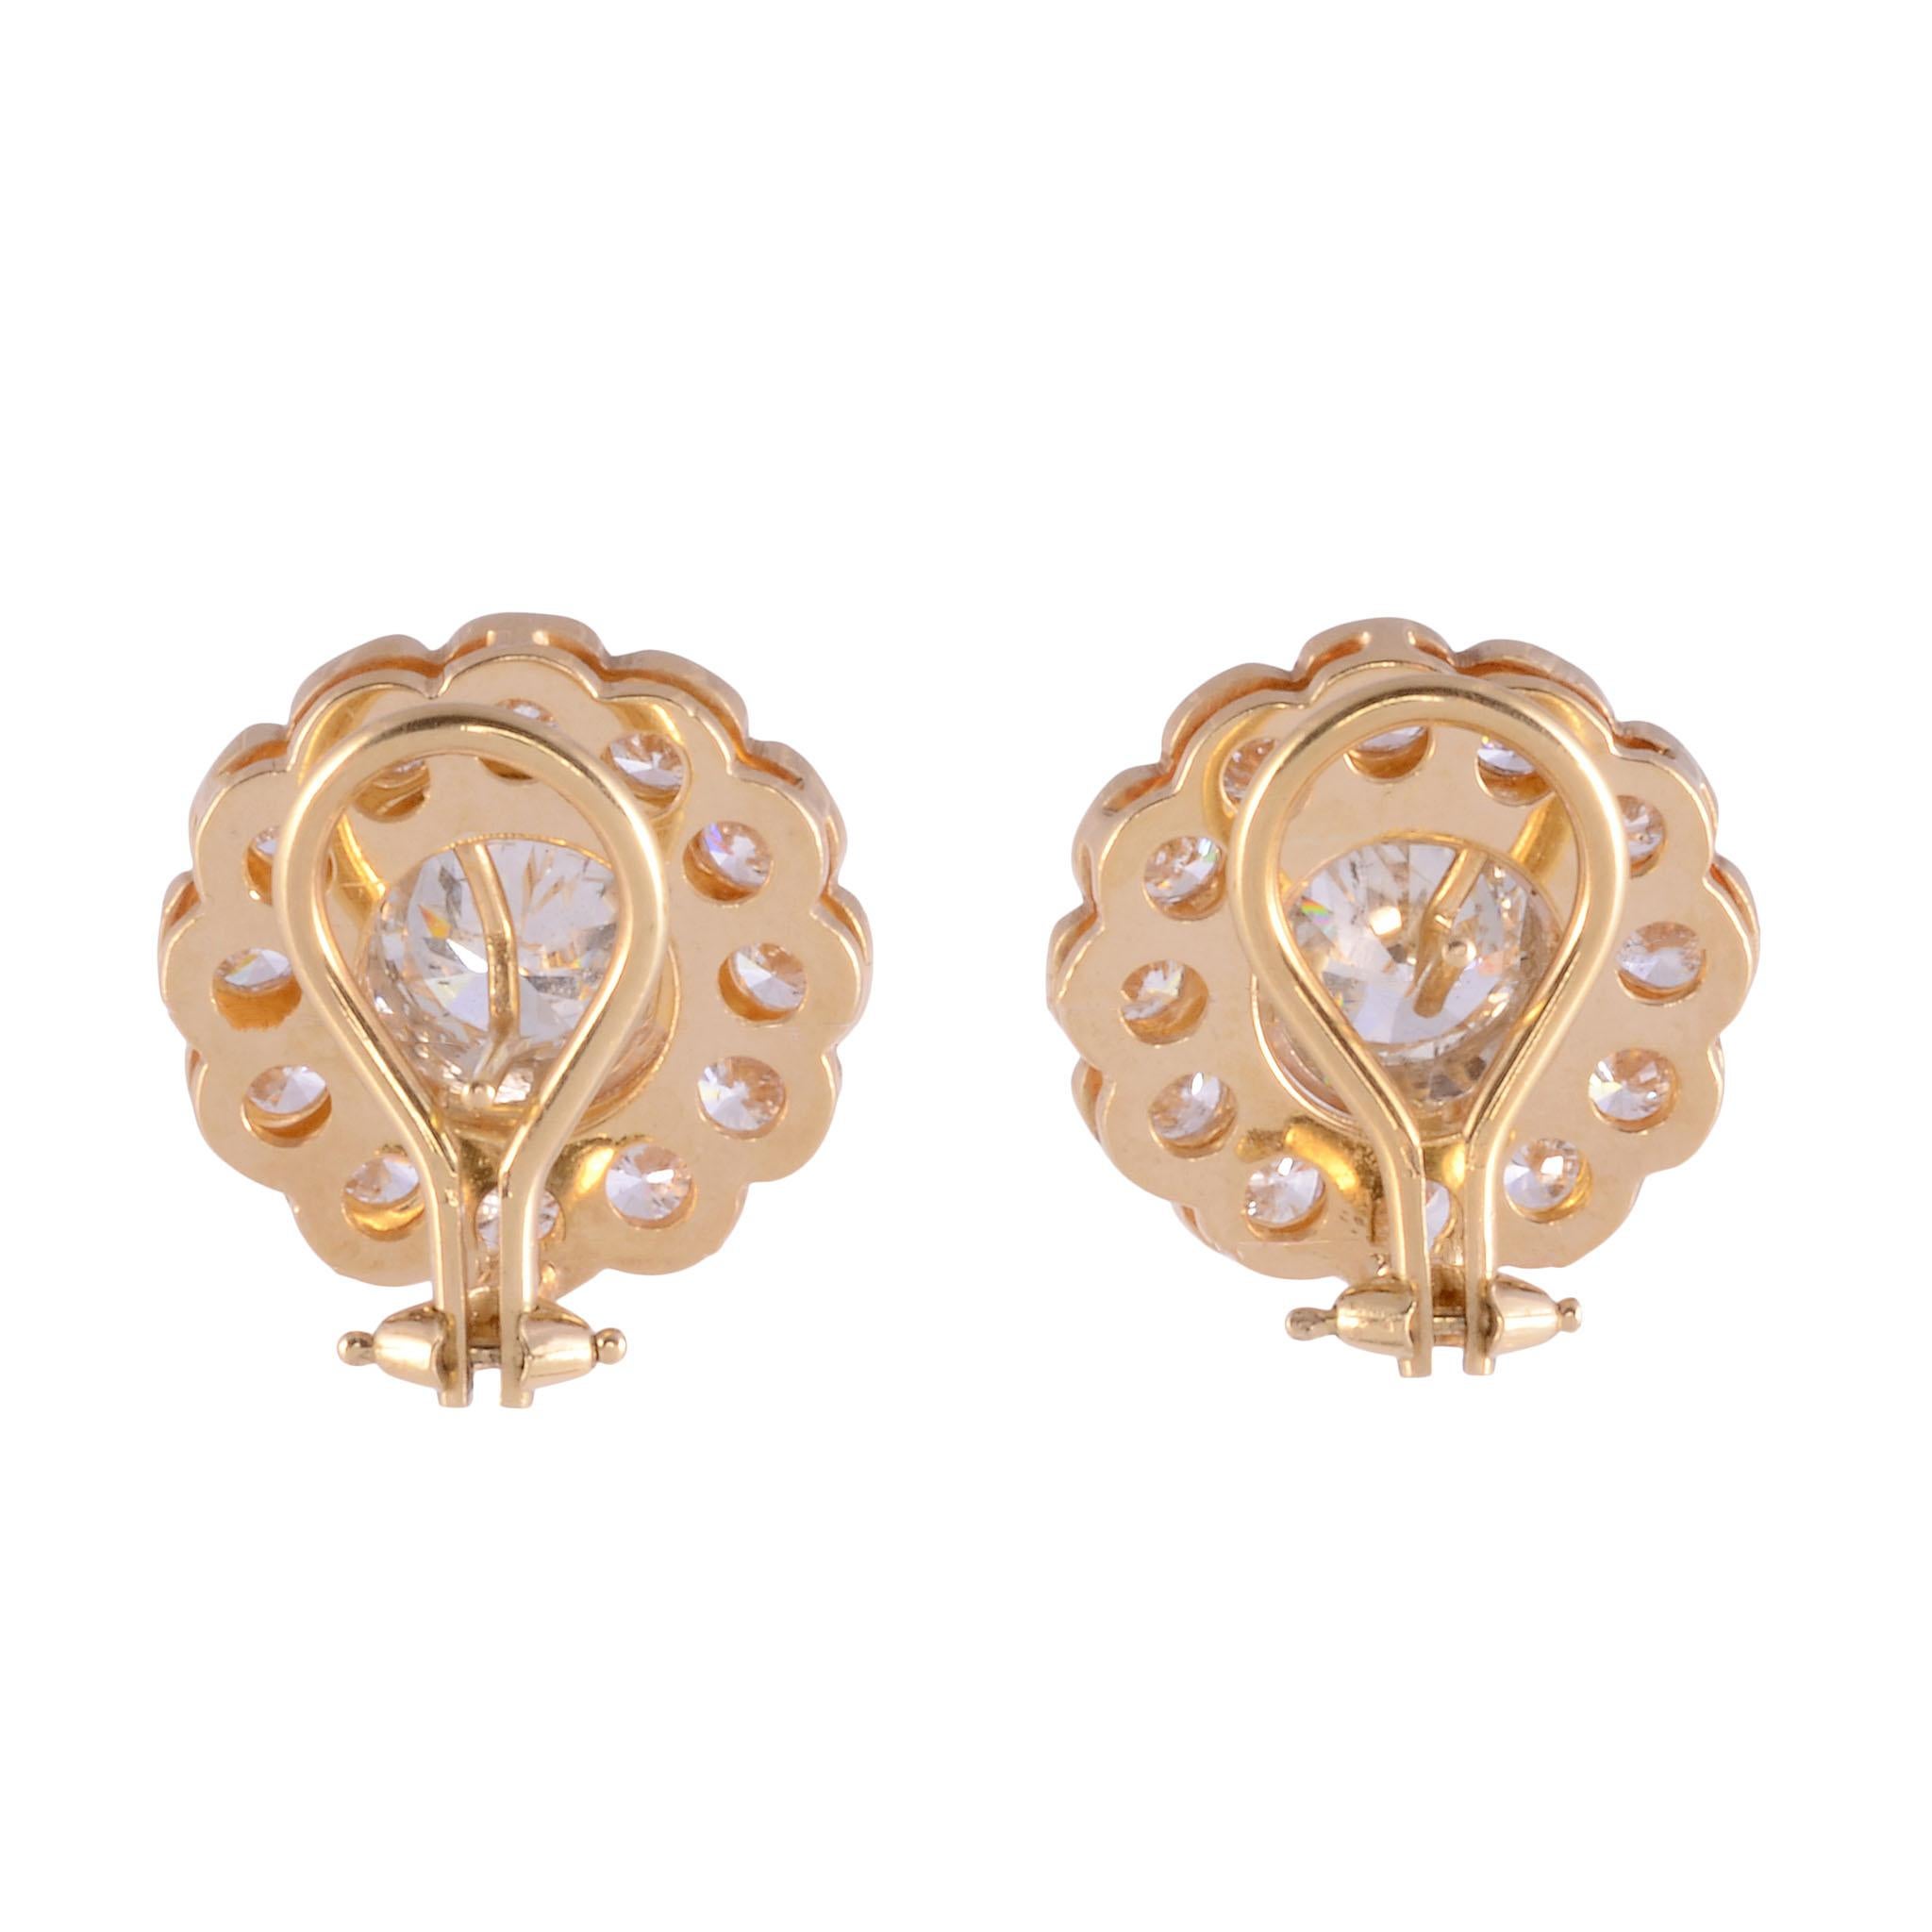 Estate 5.42 CTW rosette diamond earrings. These 18 karat yellow gold rosette earrings feature center round brilliant cut diamonds at 1.36 and 1.26 carats. They are SI1 & SI2 clarity respectively, and both K color. Accented with 24 round brilliant